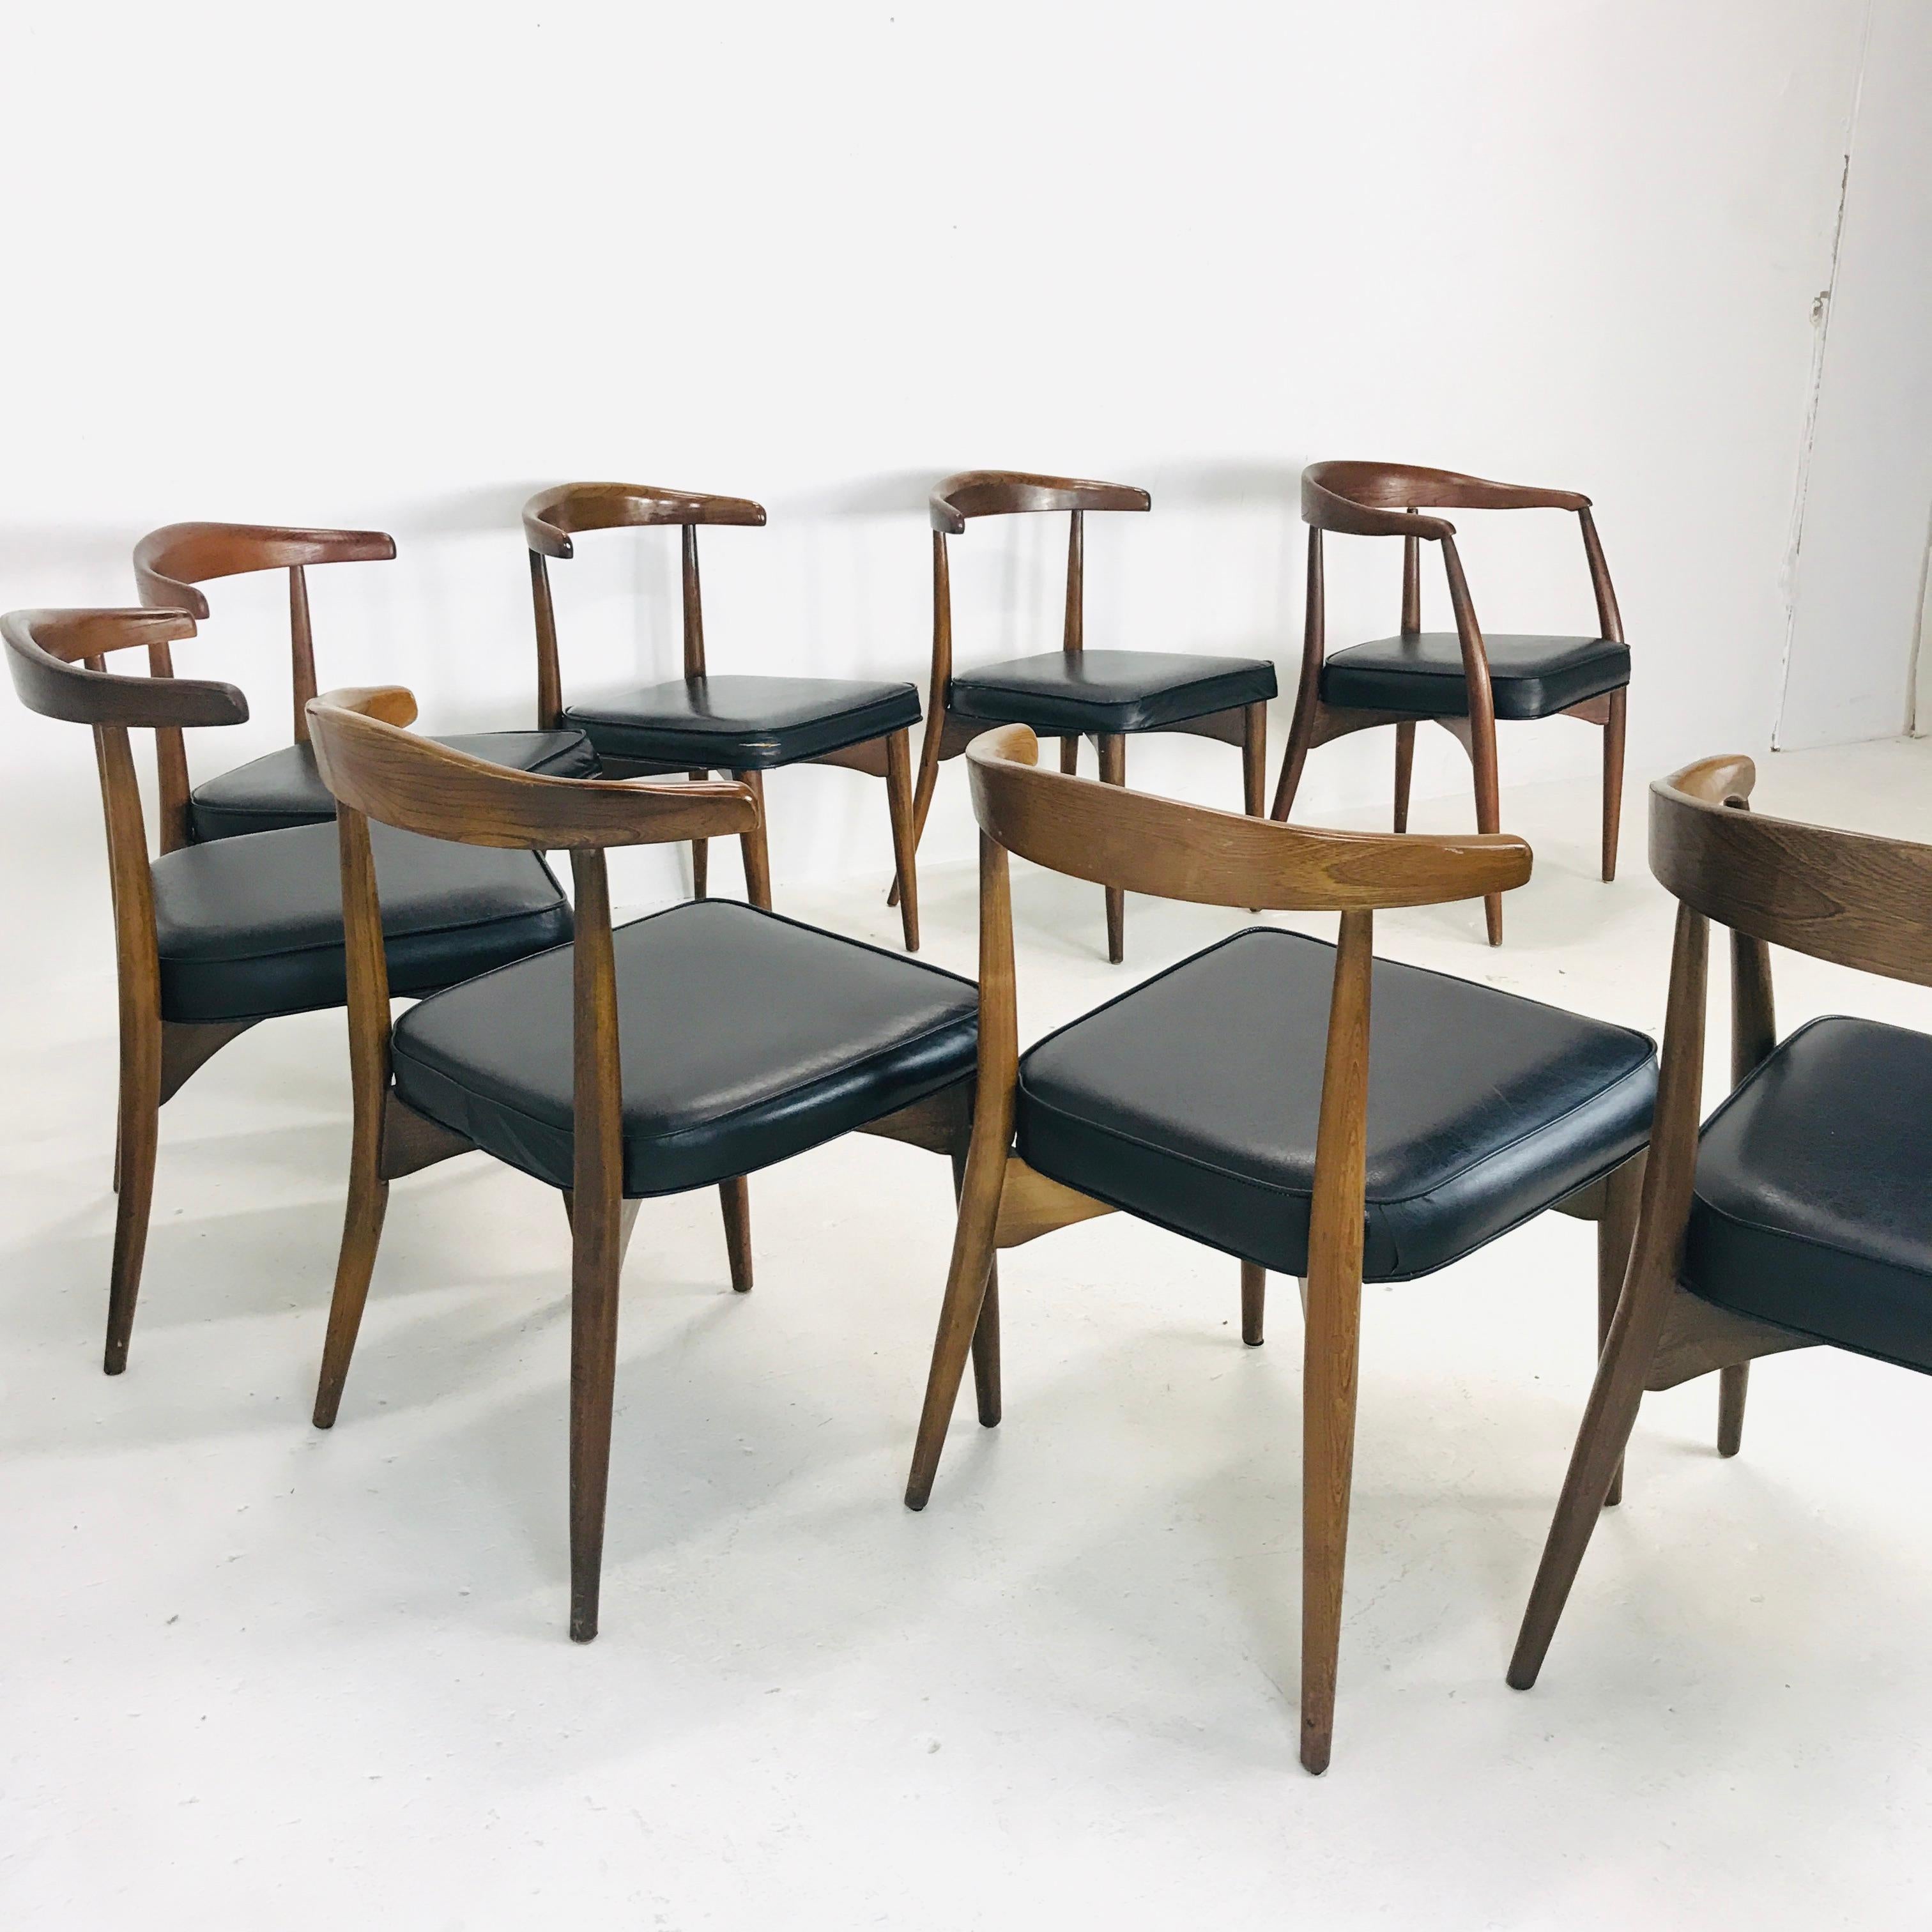 lawrence peabody dining chairs